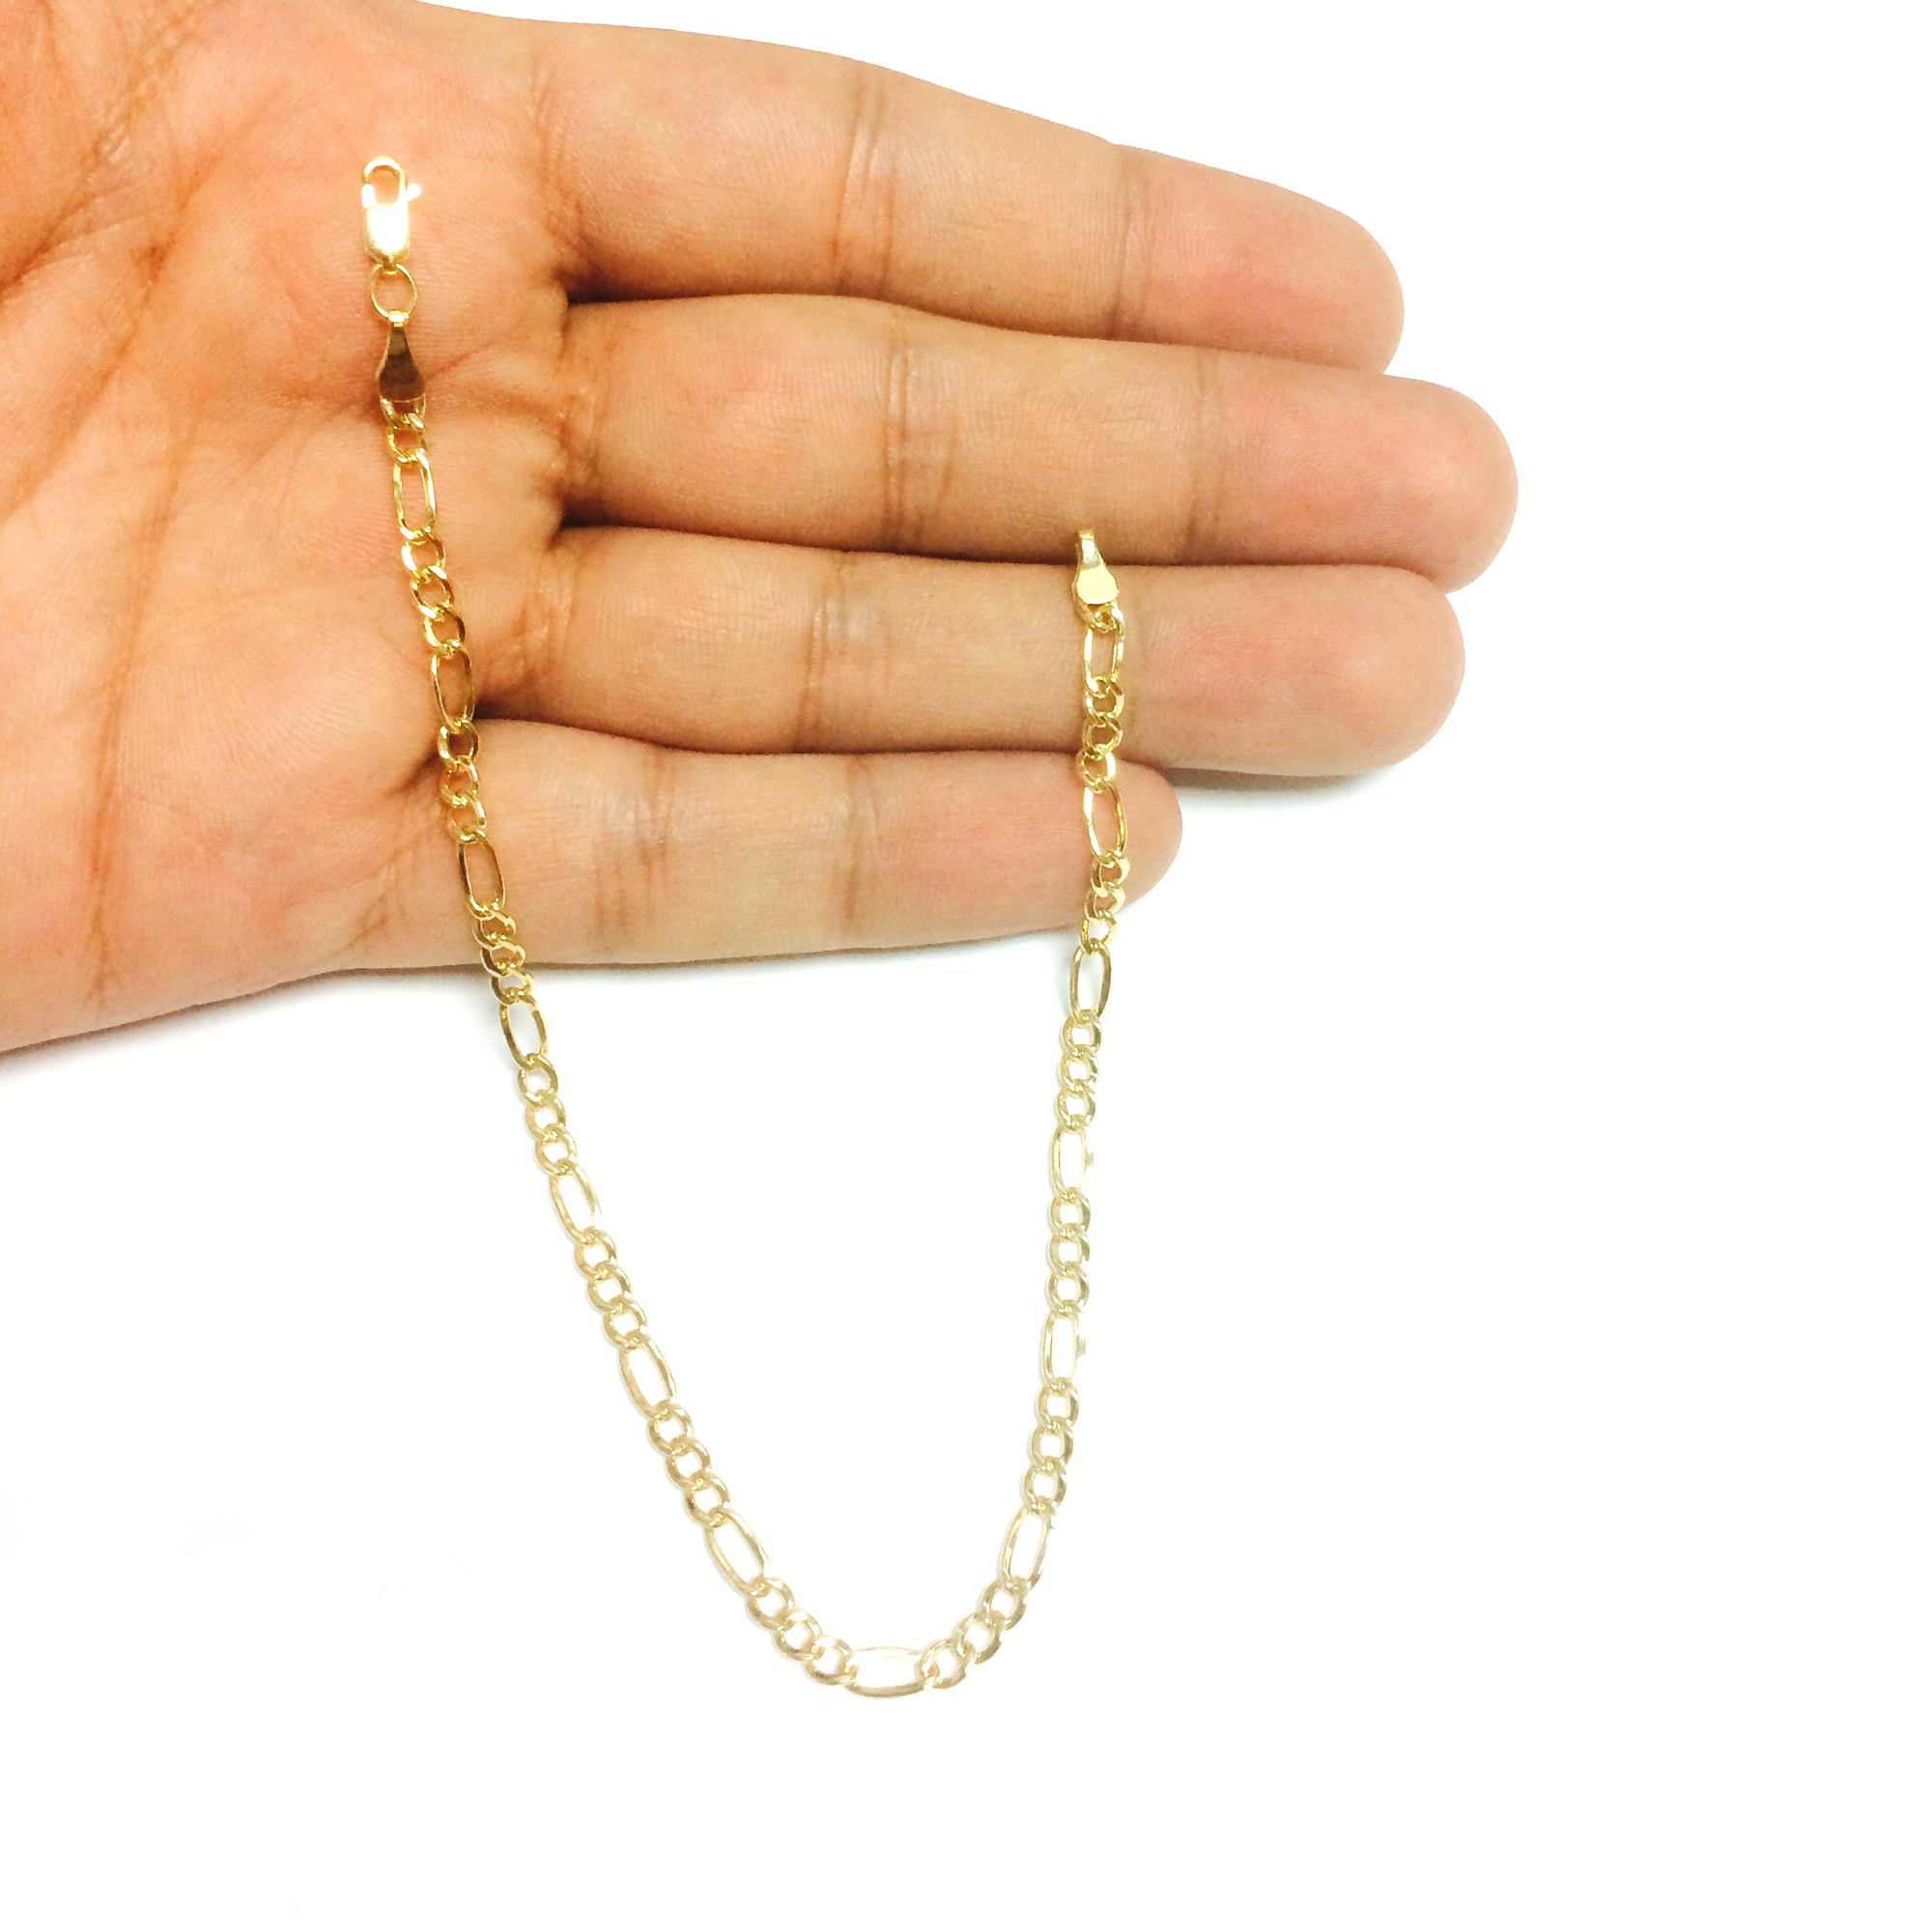 14K Yellow Gold Filled Solid Figaro Chain Bracelet, 3.2 mm, 8.5" fine designer jewelry for men and women